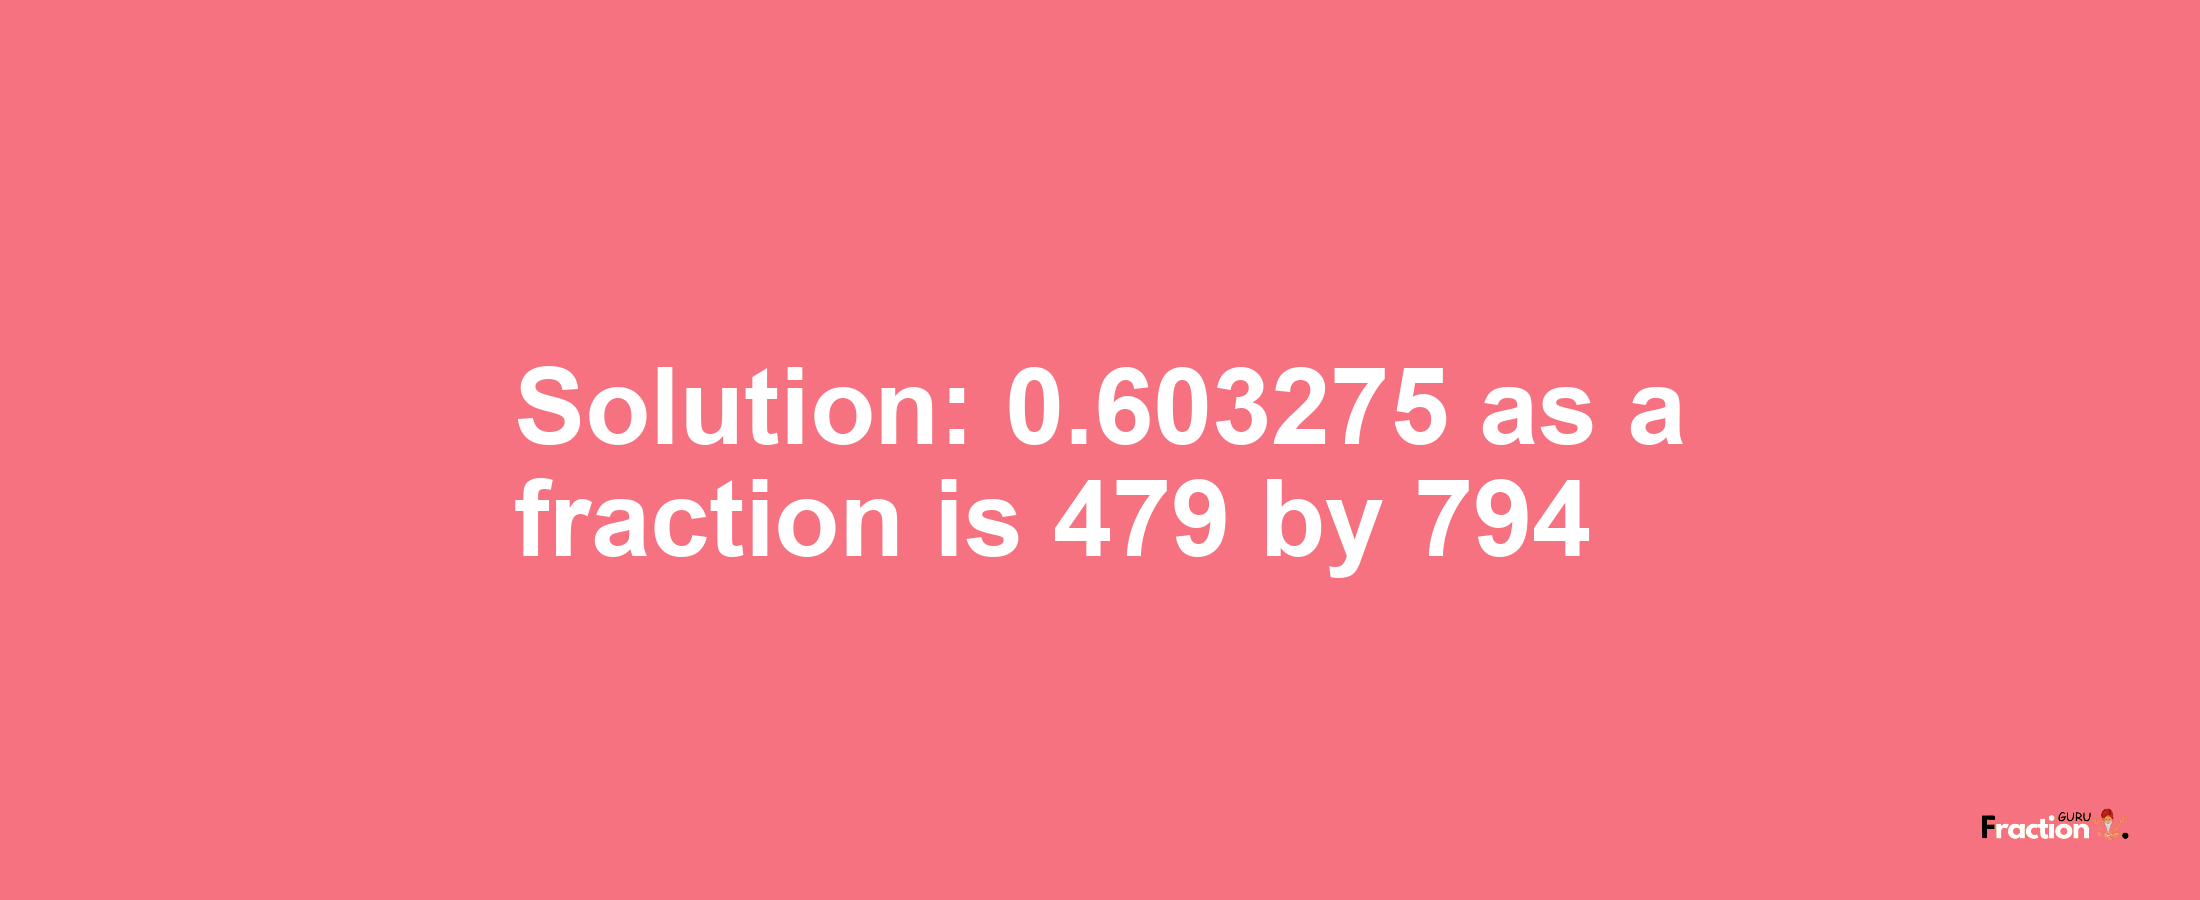 Solution:0.603275 as a fraction is 479/794